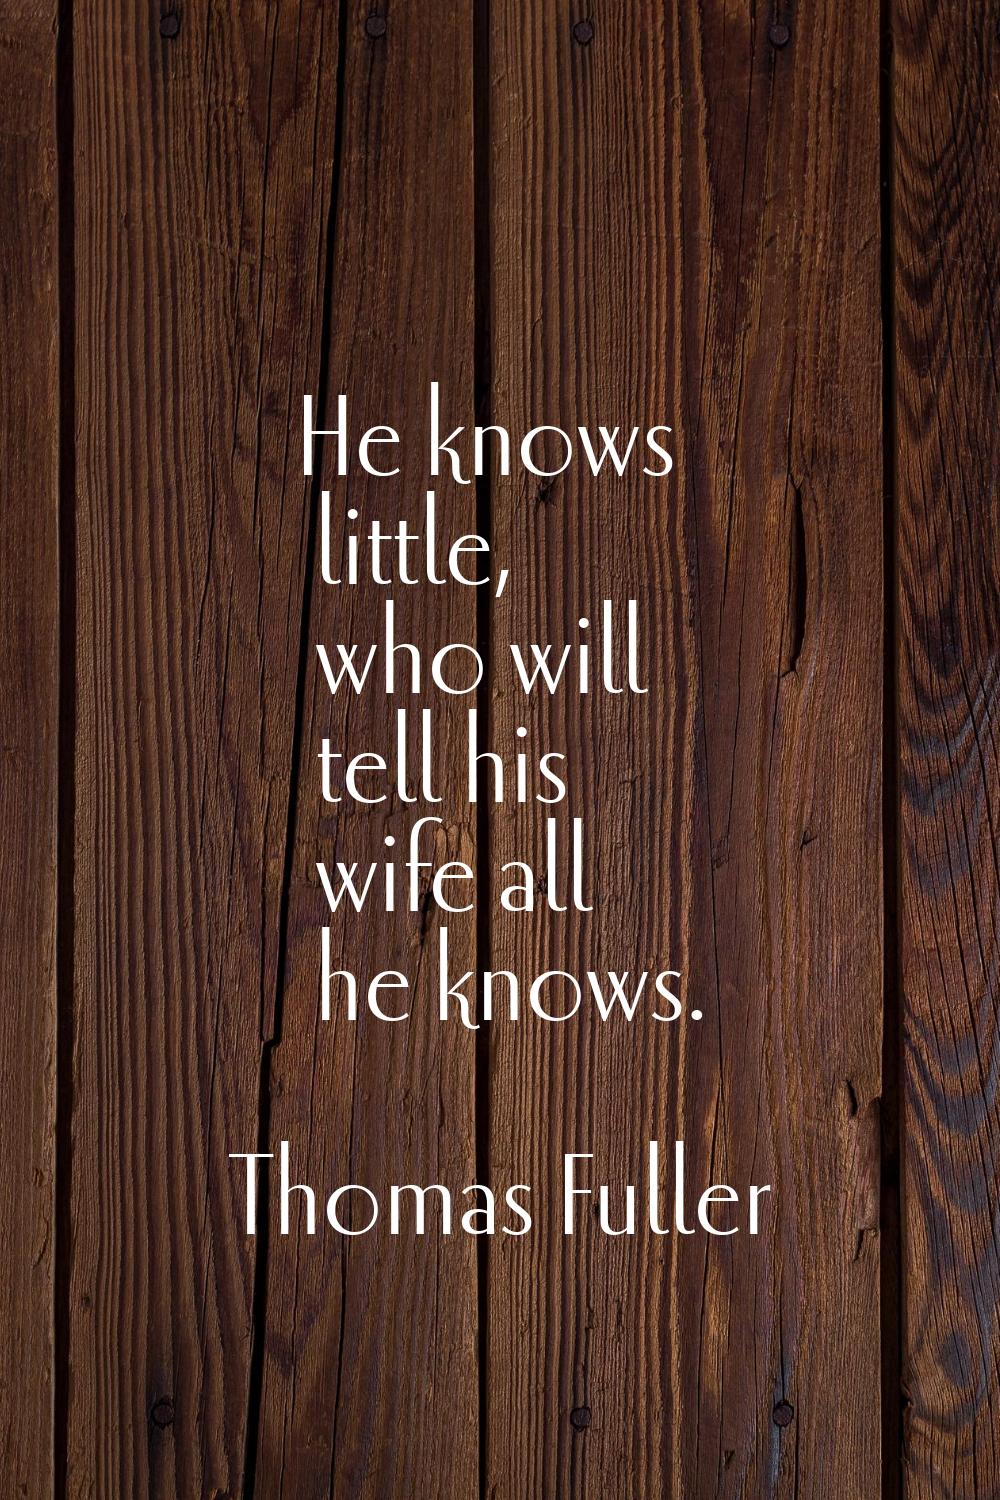 He knows little, who will tell his wife all he knows.